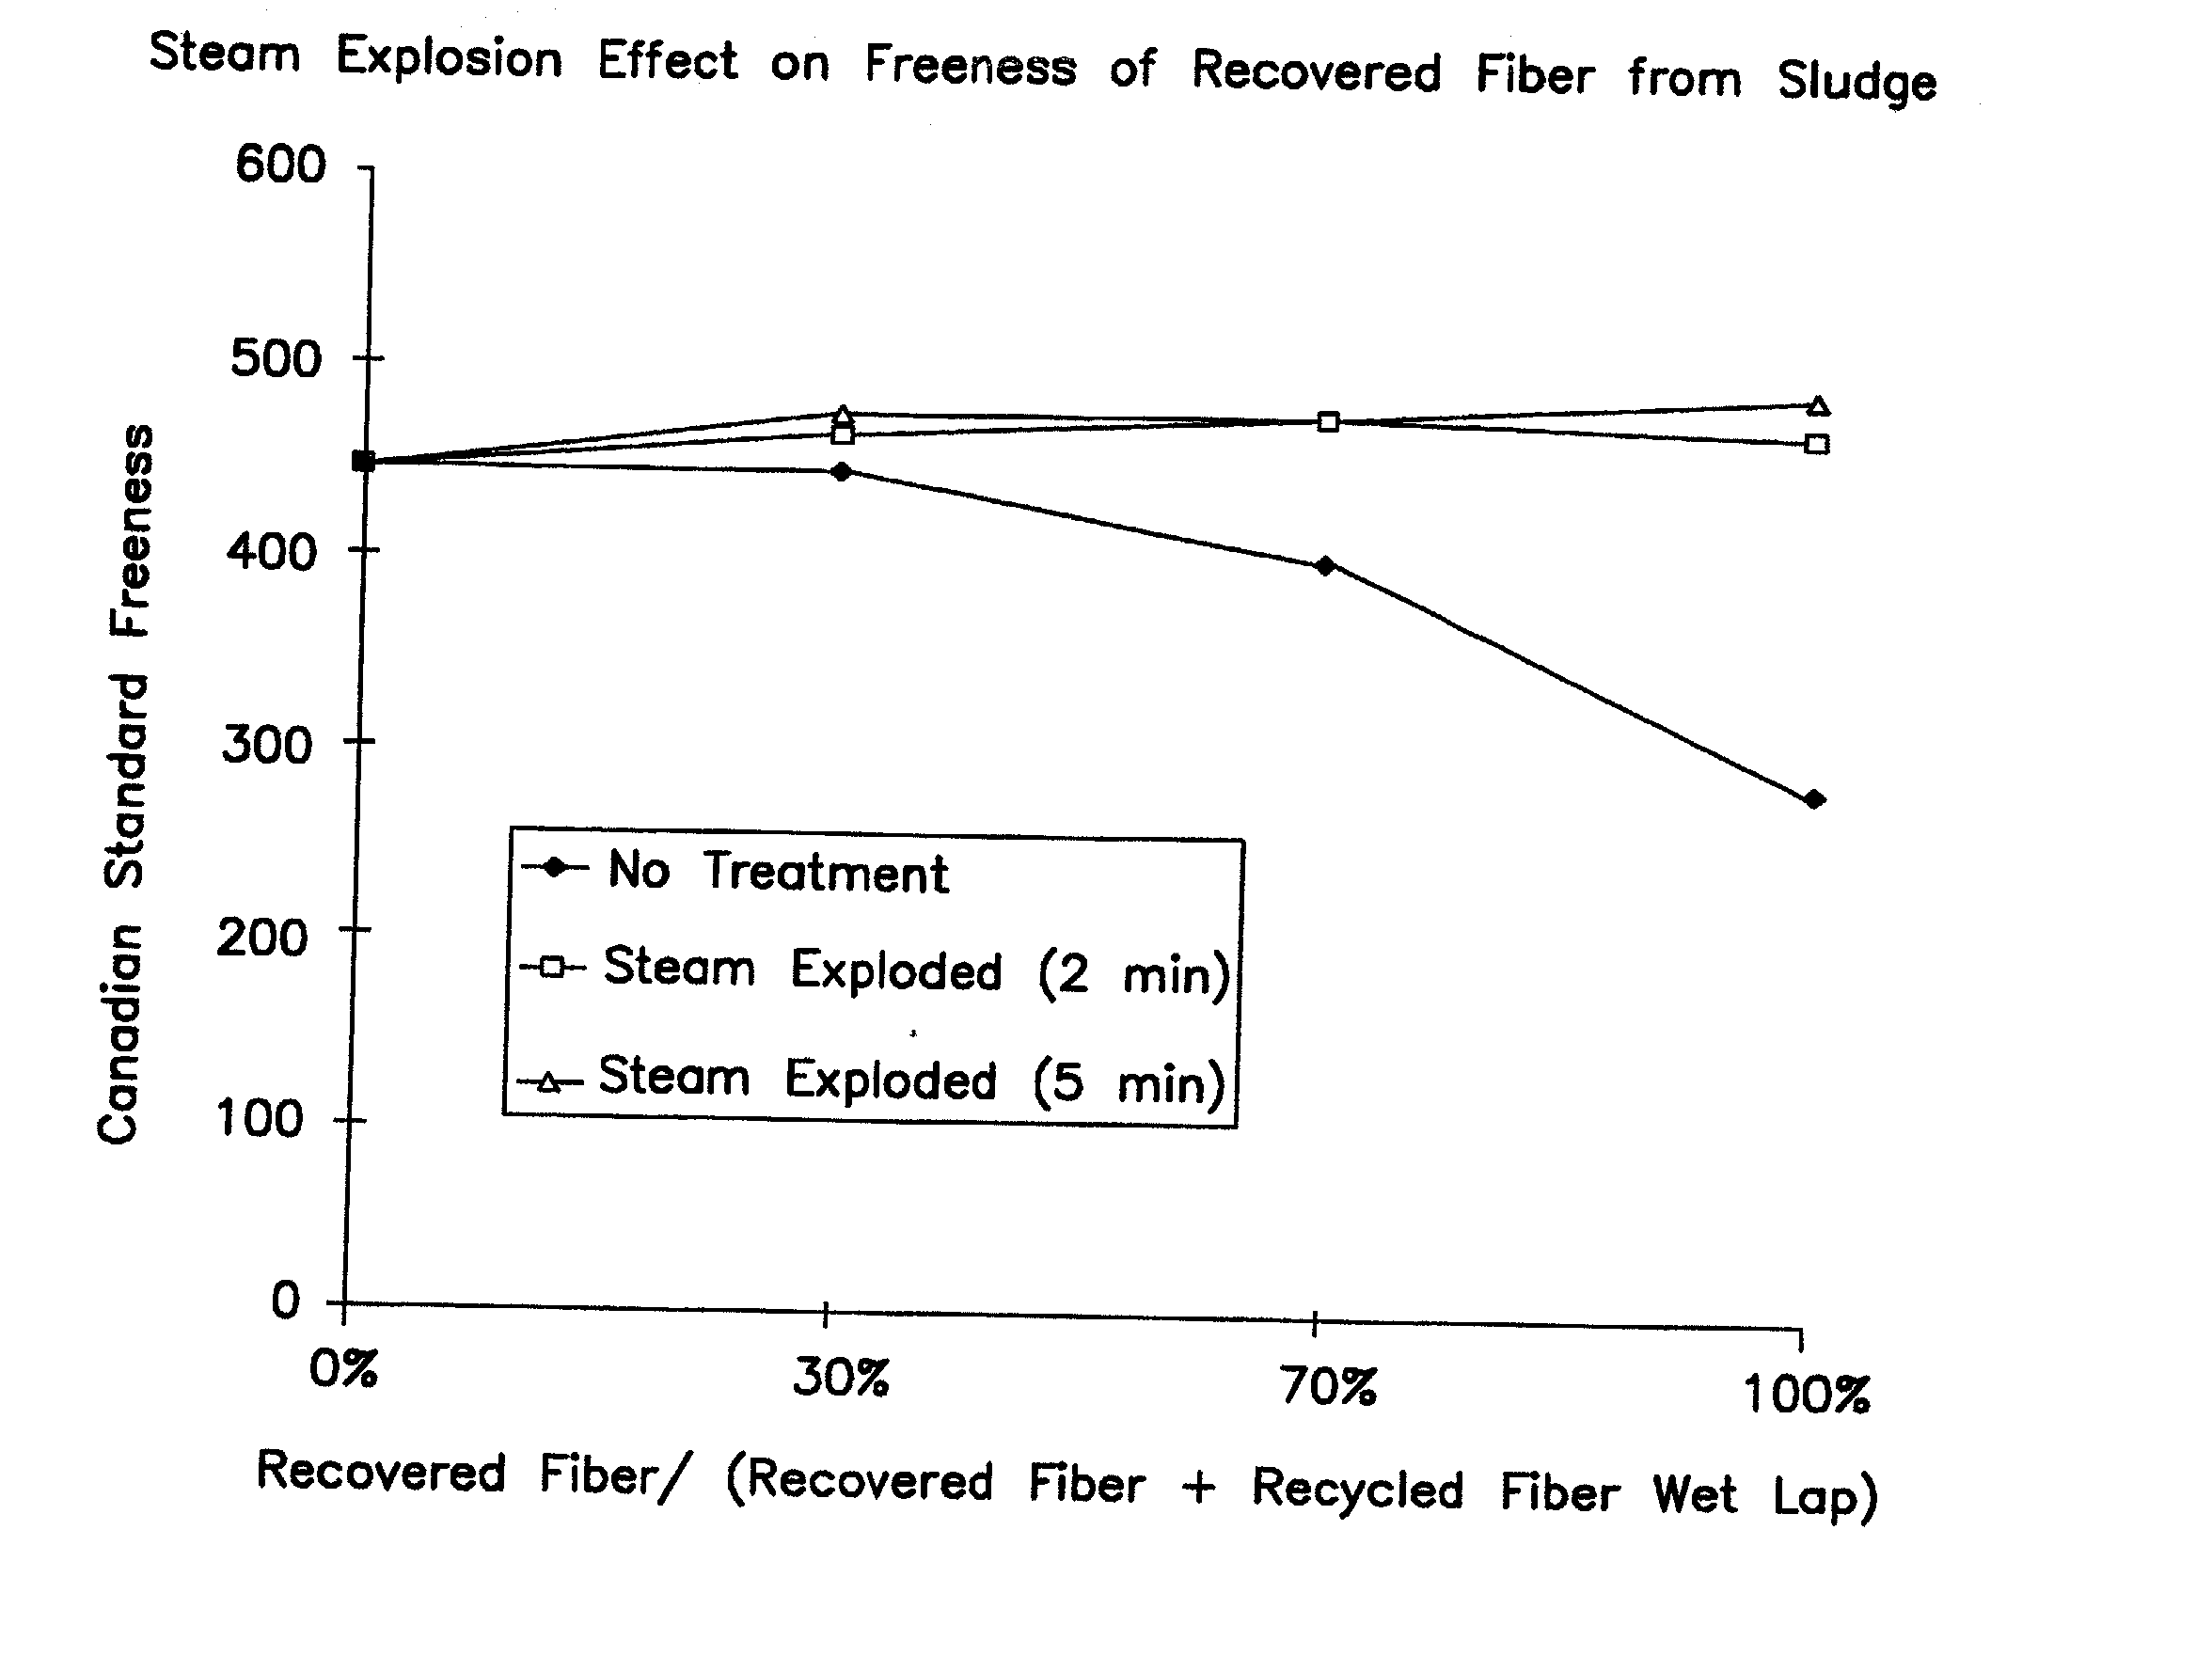 Recovery of fibers from a fiber processing waste sludge